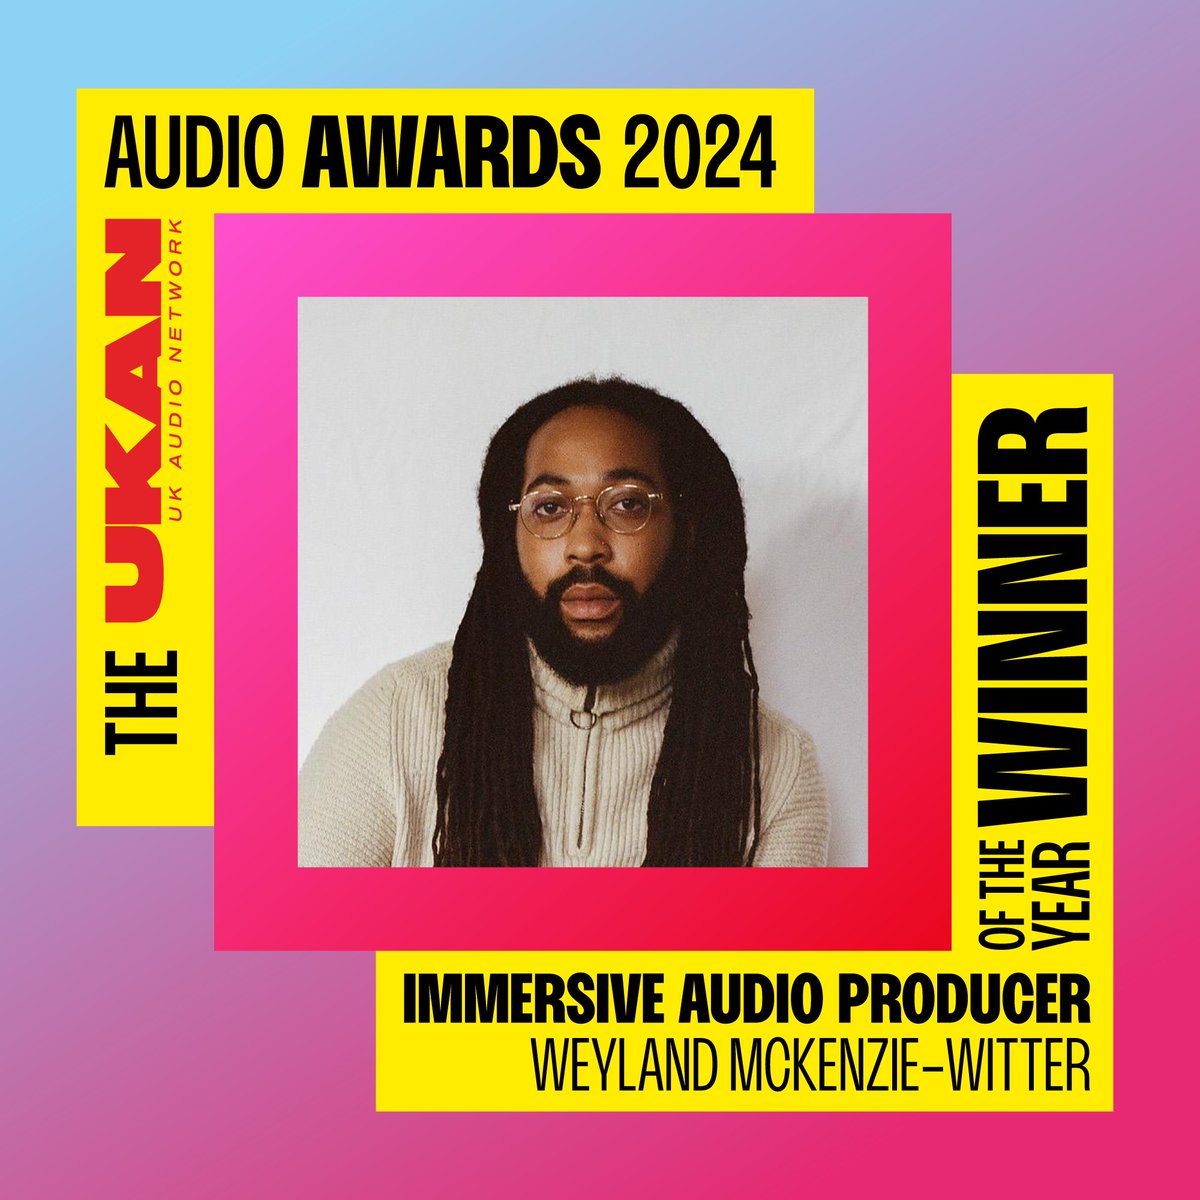 CONGRATULATIONS to @Weylandmck for winning Immersive Audio Producer of the Year at The @UKAudioNetwork Audio Awards 2024! The awards nominated and voted for by the audio community to celebrate and uplift, inline with UKAN's aims of: Transparency, Equity and Diversity.